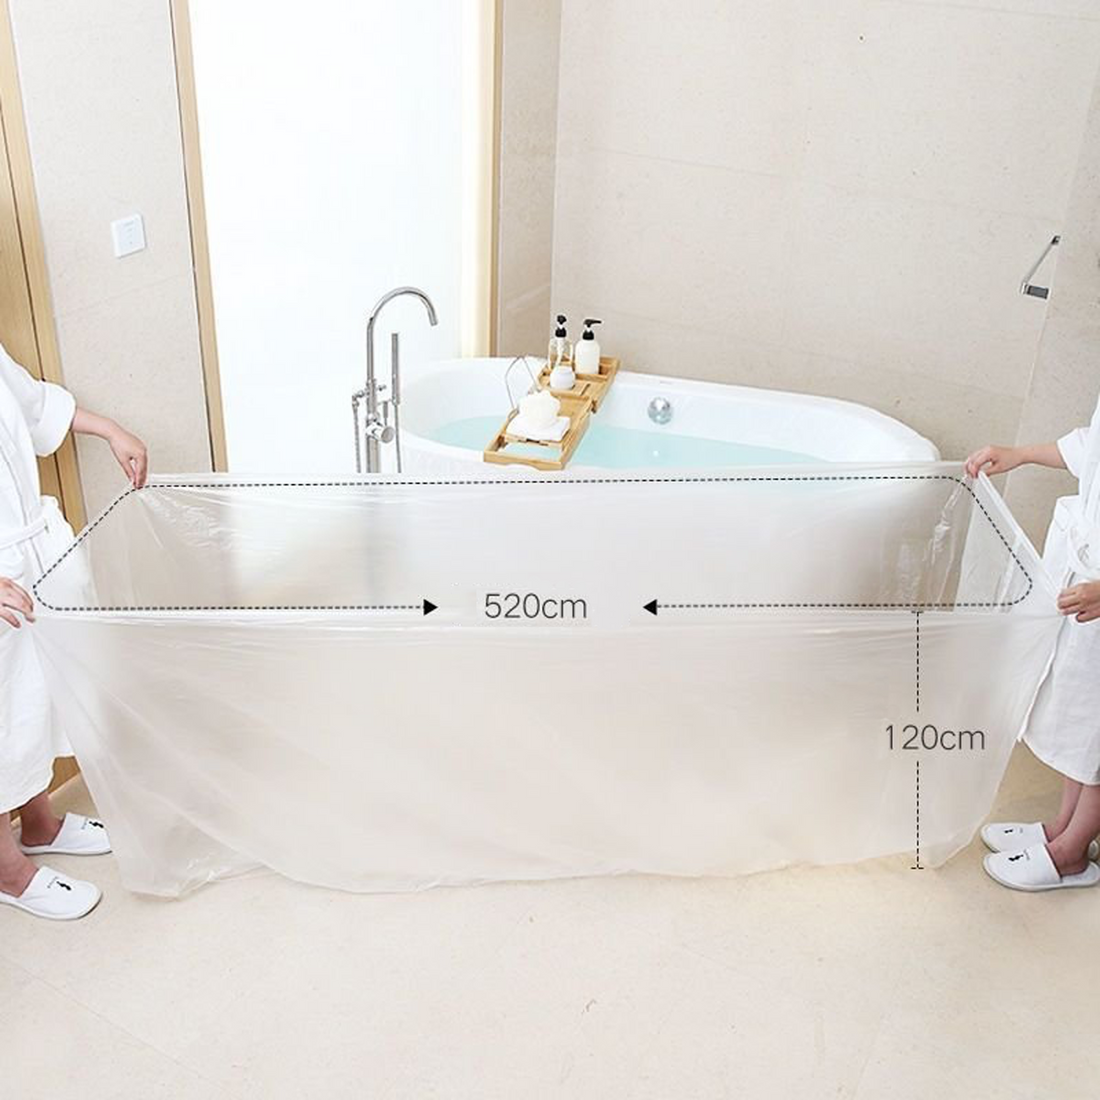 YOUNGTIME Bathtub Bag for Traveling/ Hotel/ Household 1 pc